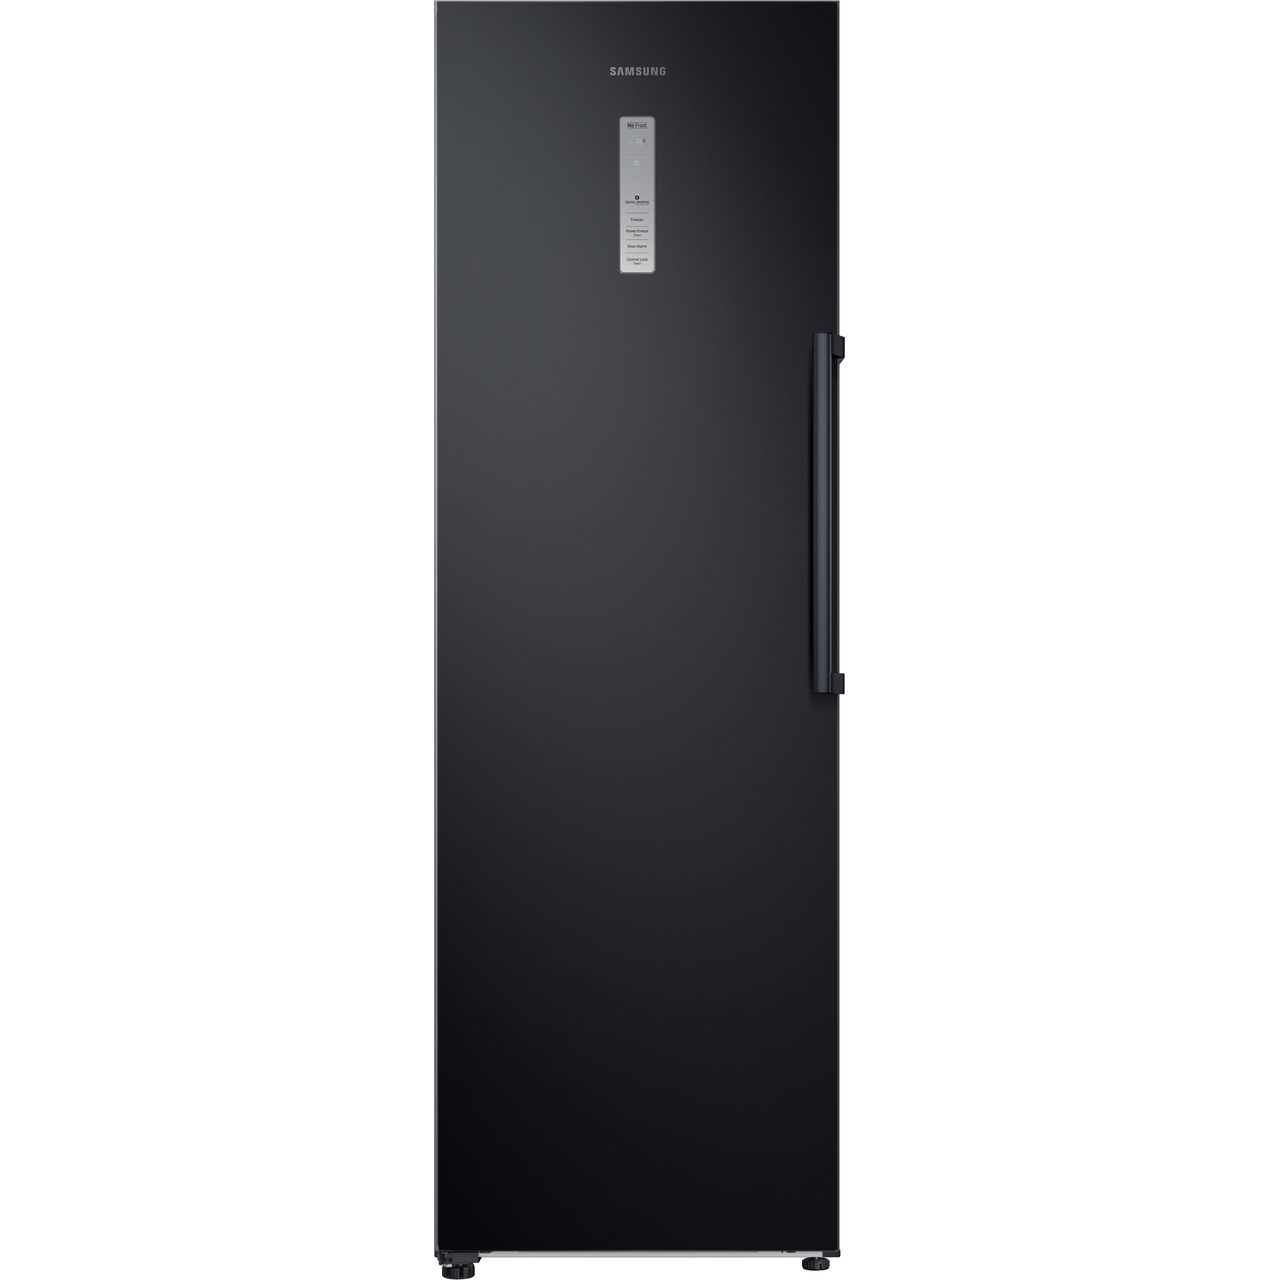 Samsung RR7000M RZ32M7120BC Frost Free Upright Freezer Review